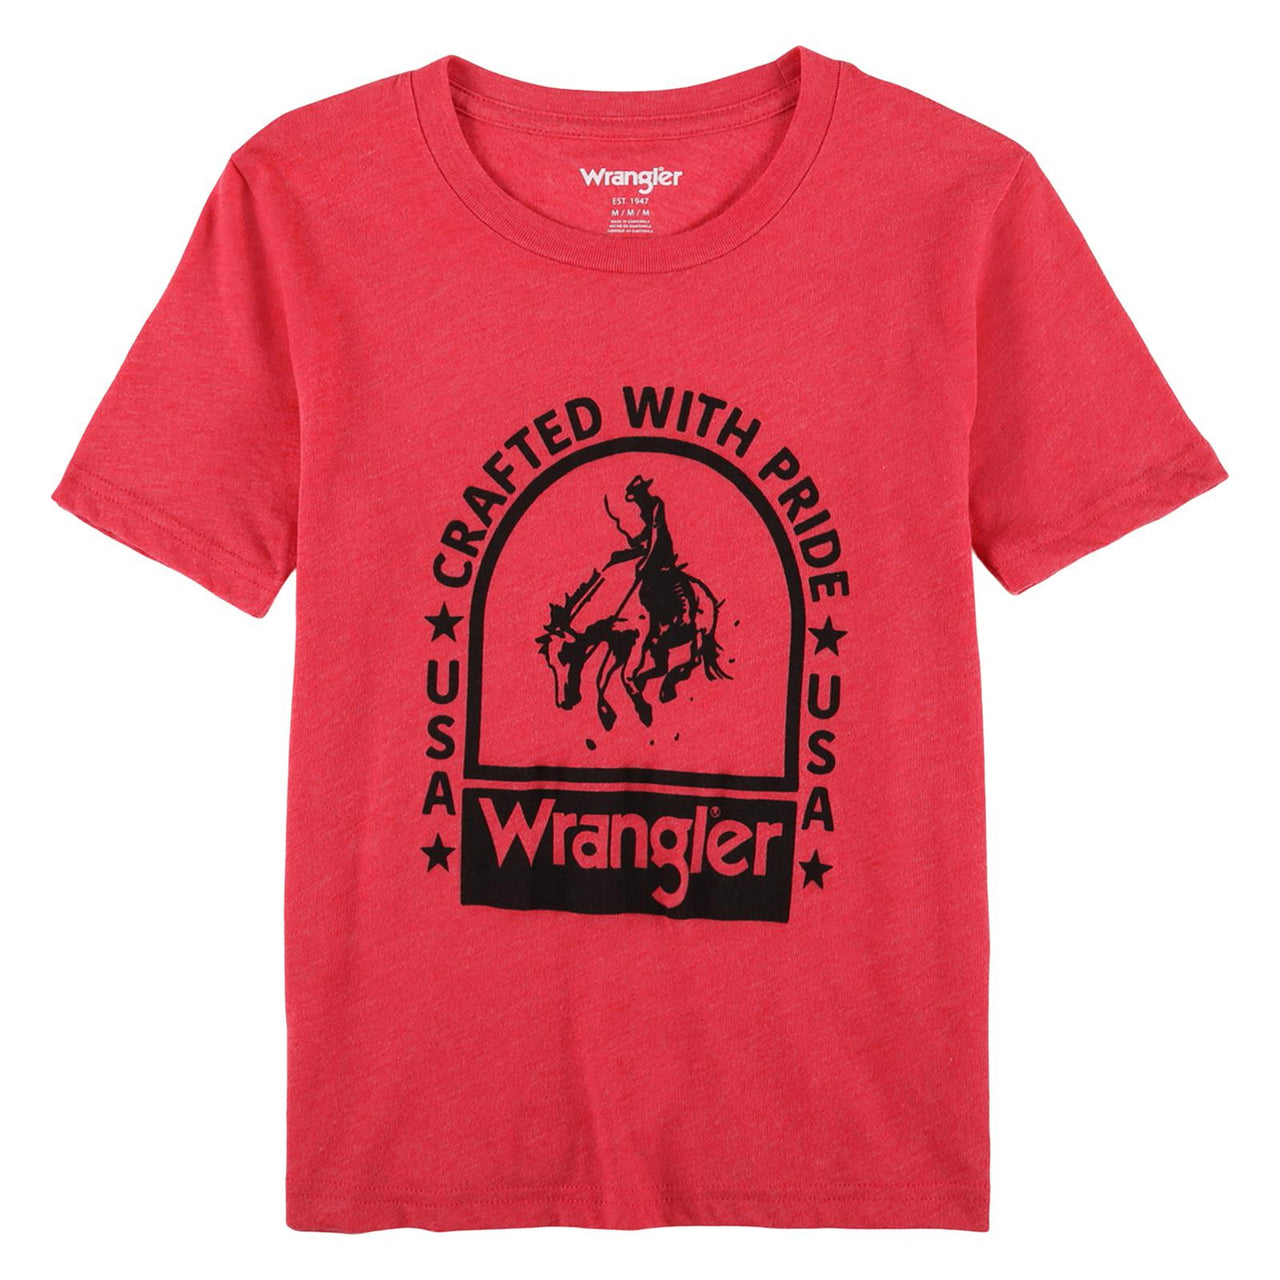 Wrangler Boys Crafted with Pride Graphic Tee